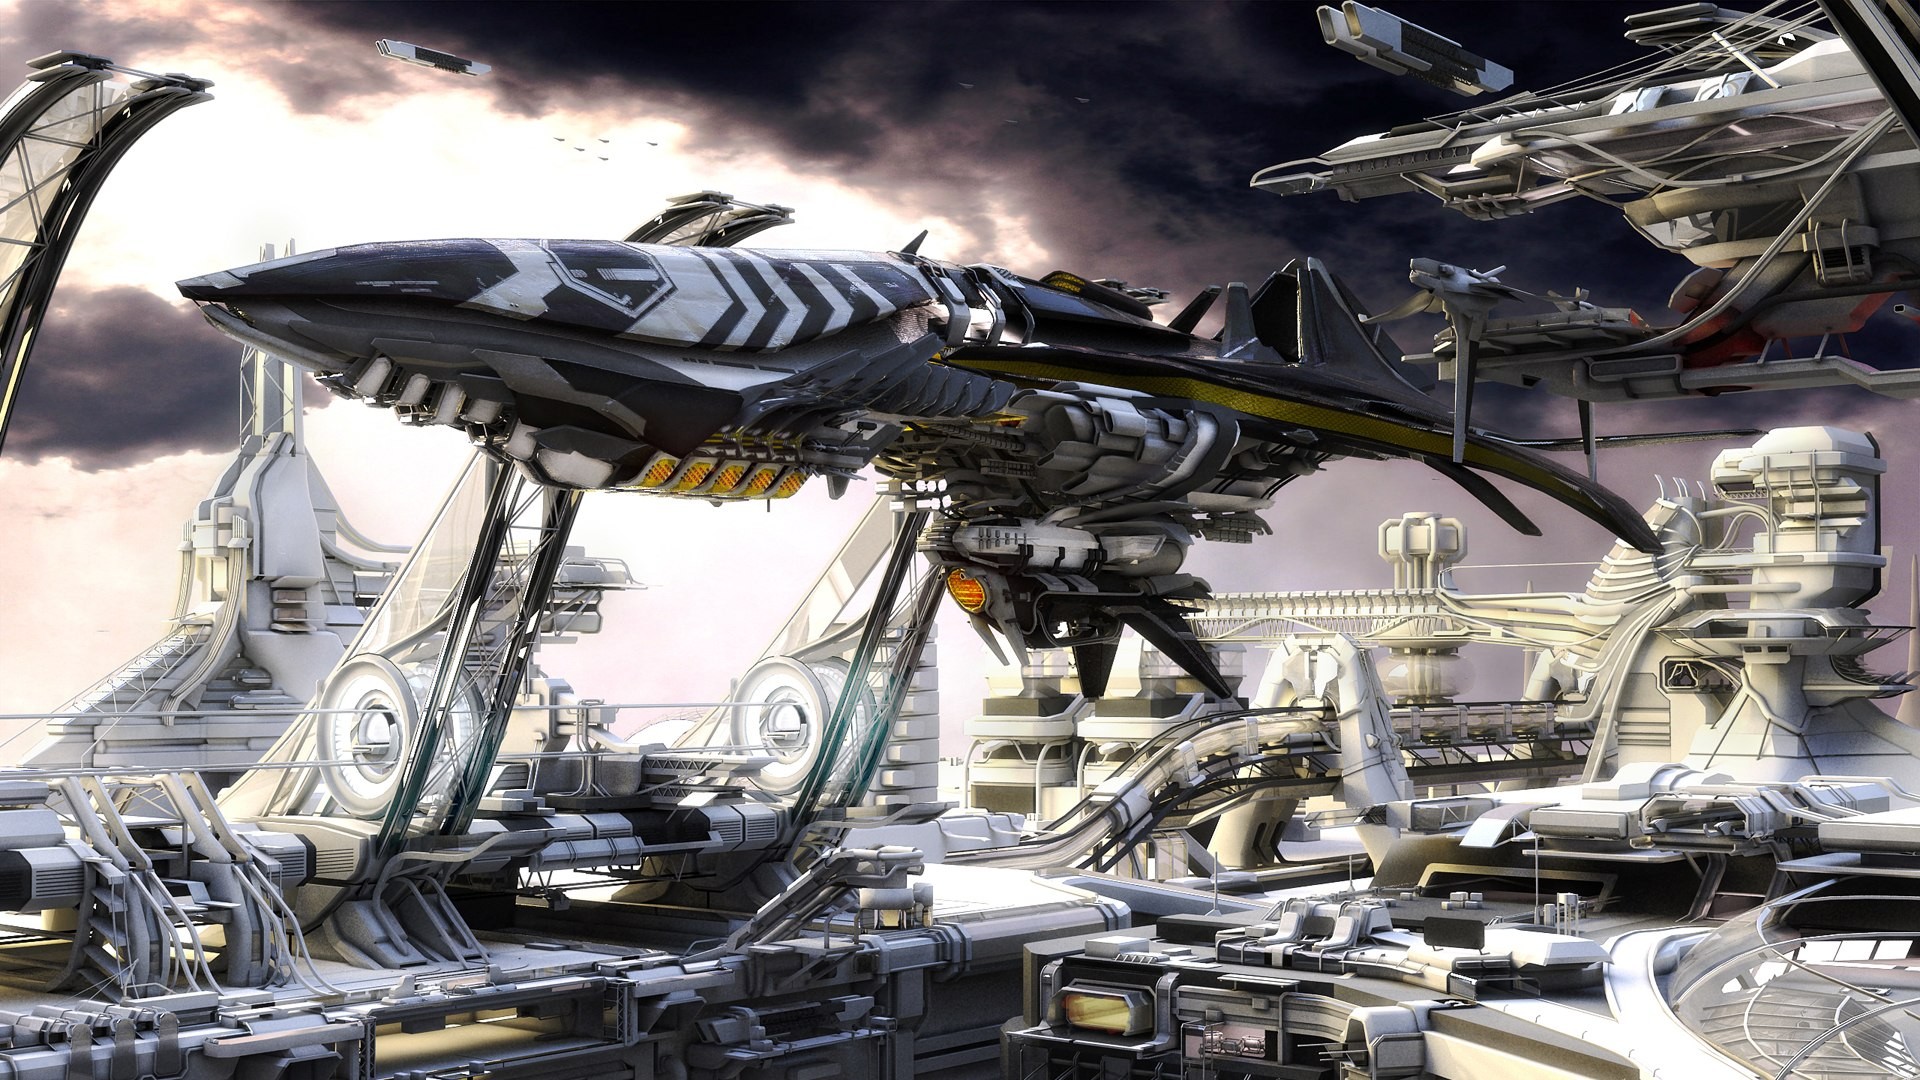 General 1920x1080 spaceship space station vehicle science fiction futuristic